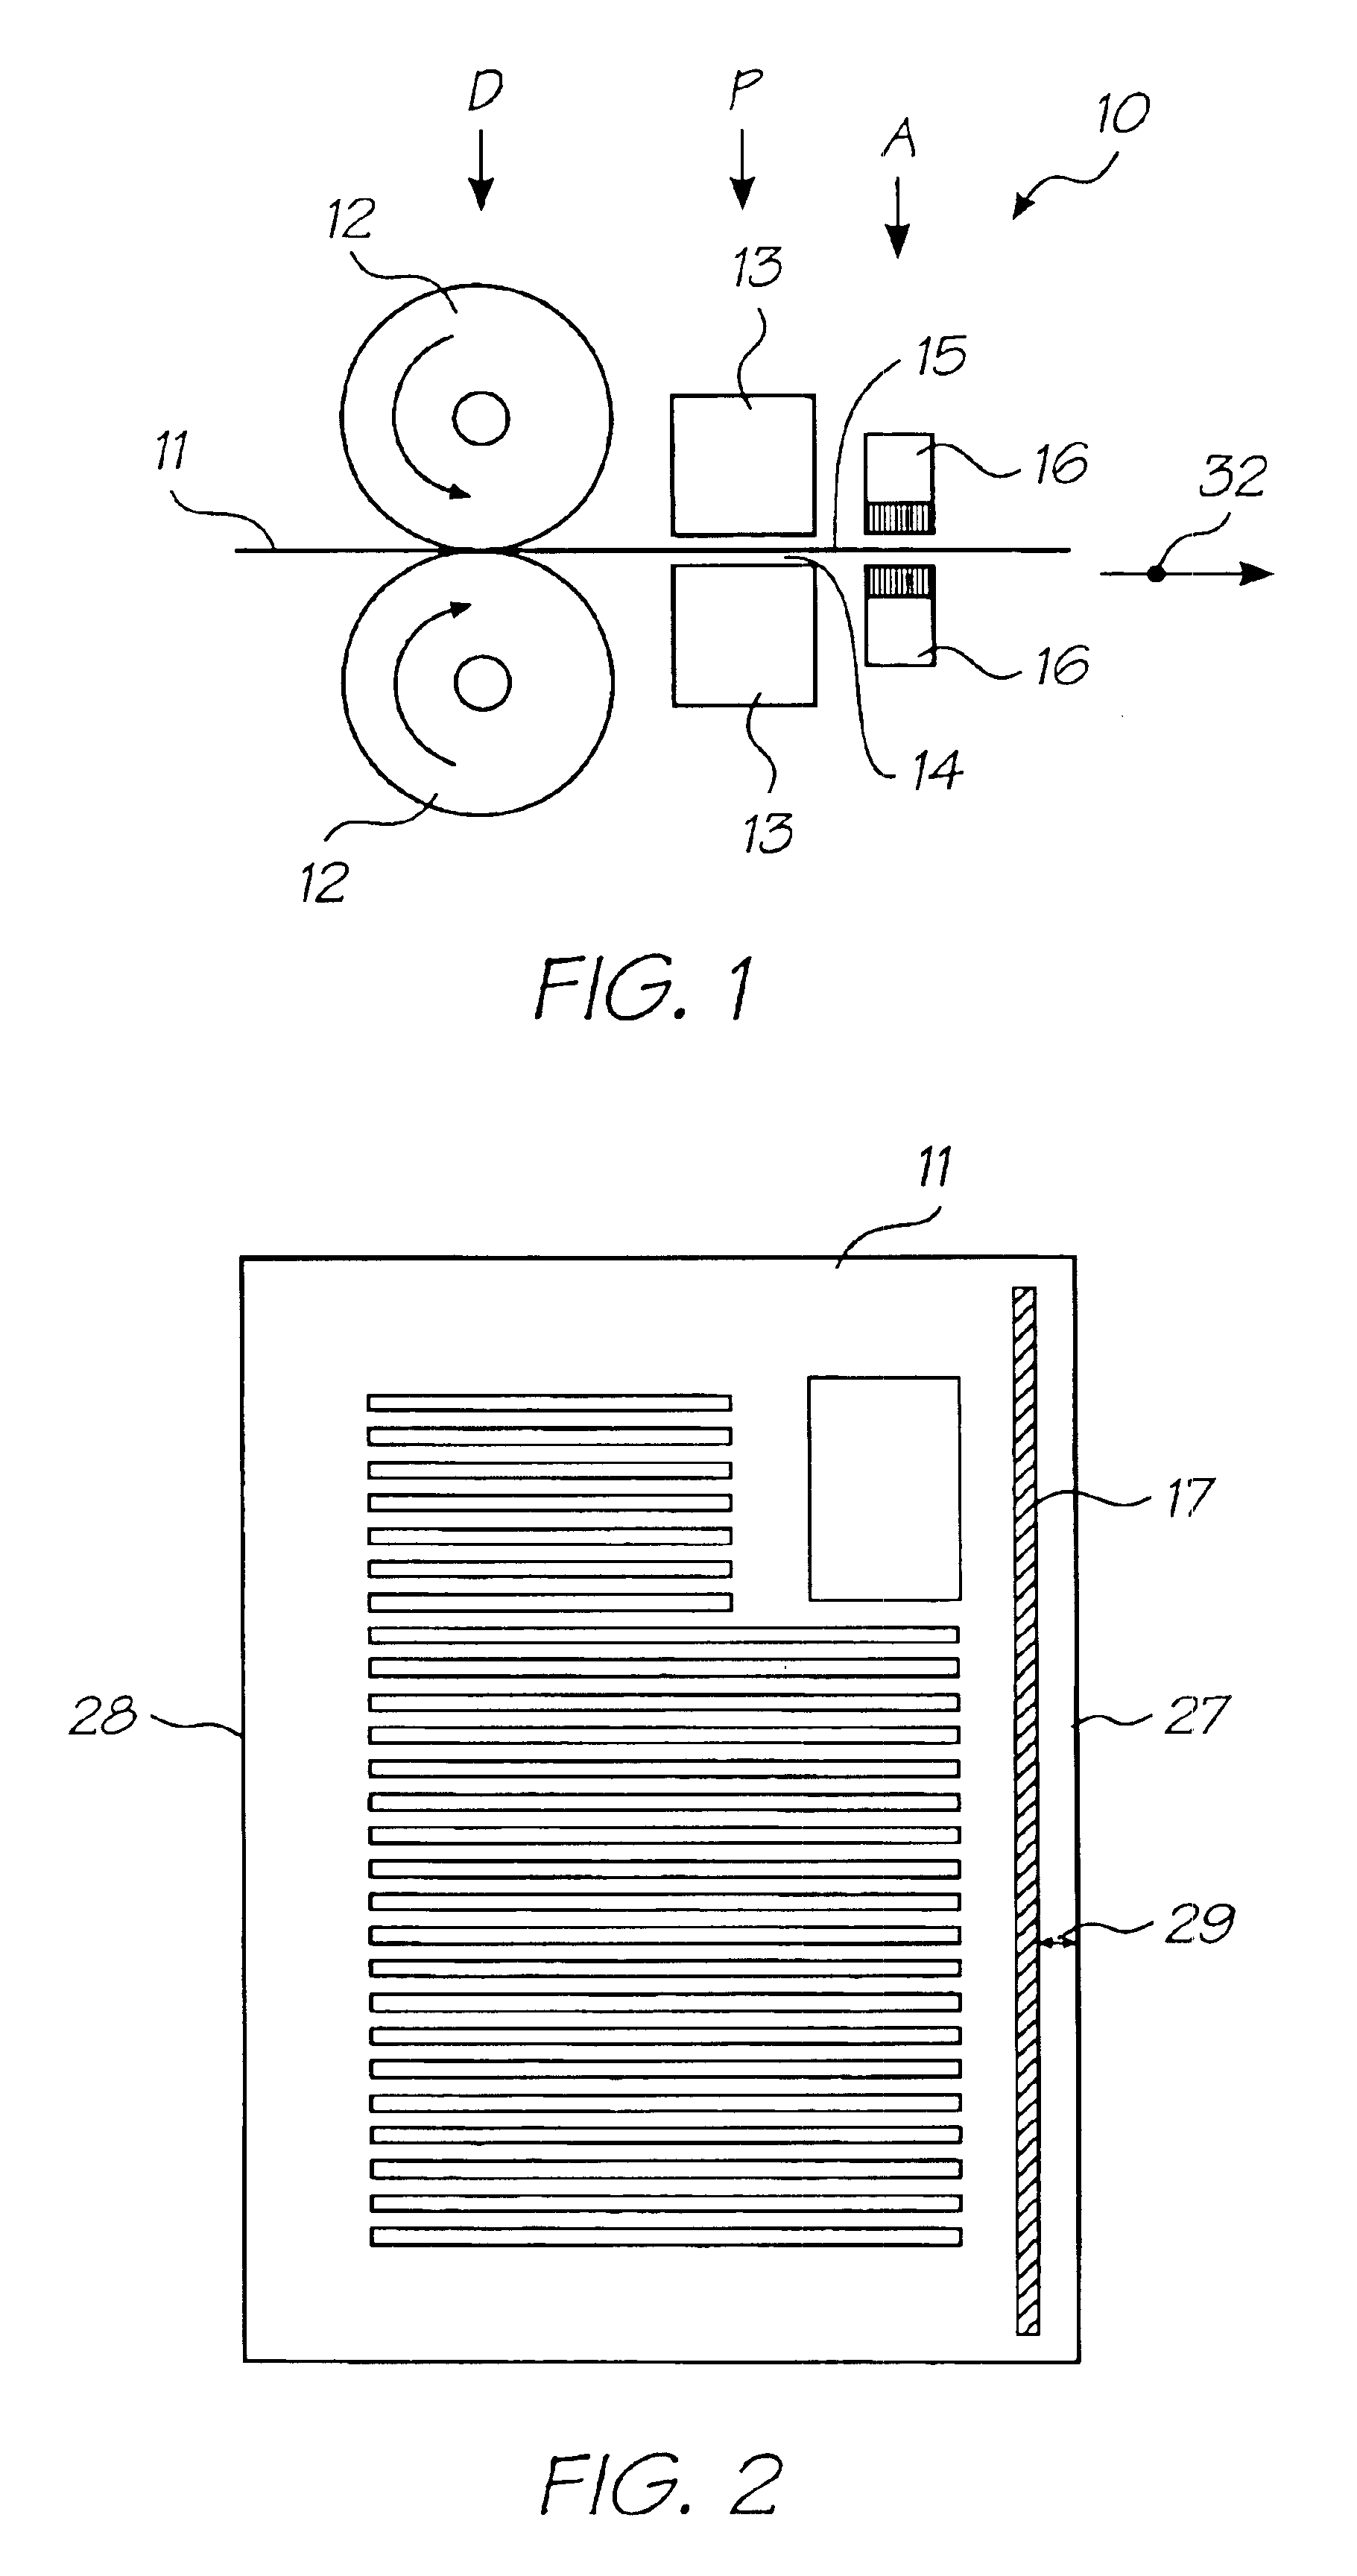 Printer that incorporates a binding apparatus for binding sheets